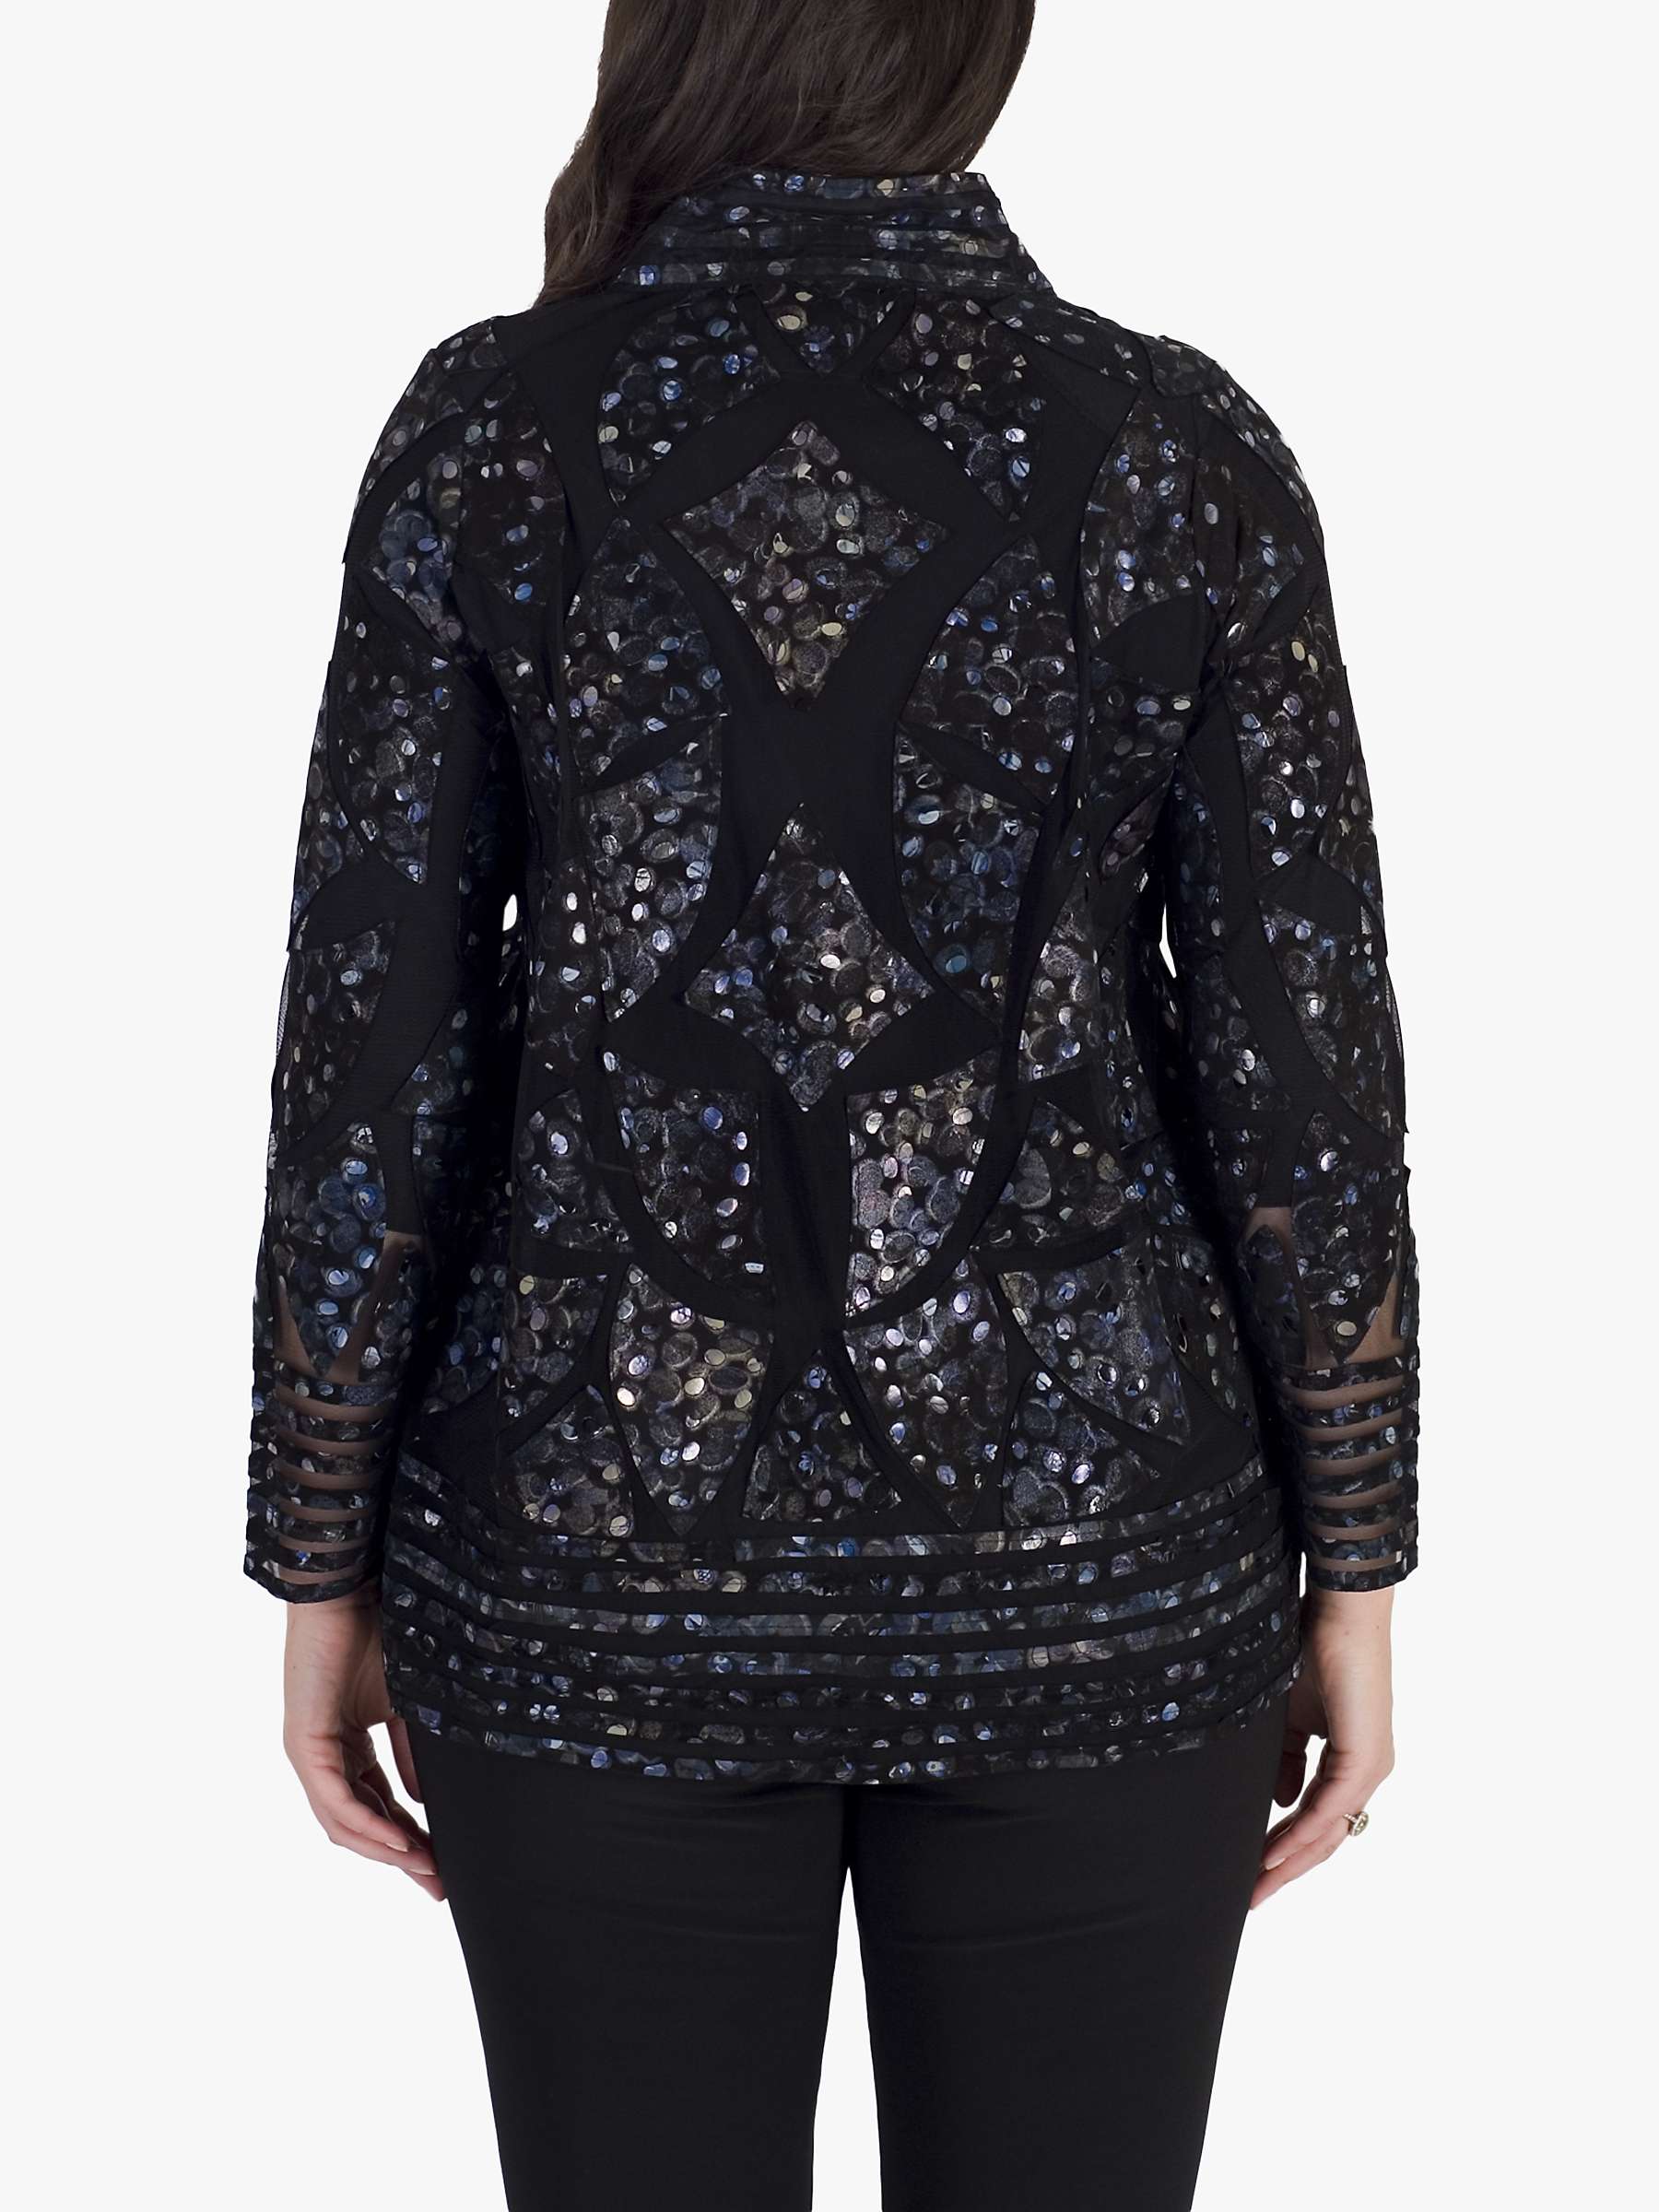 Buy Chesca Blossom Jacket, Navy Online at johnlewis.com